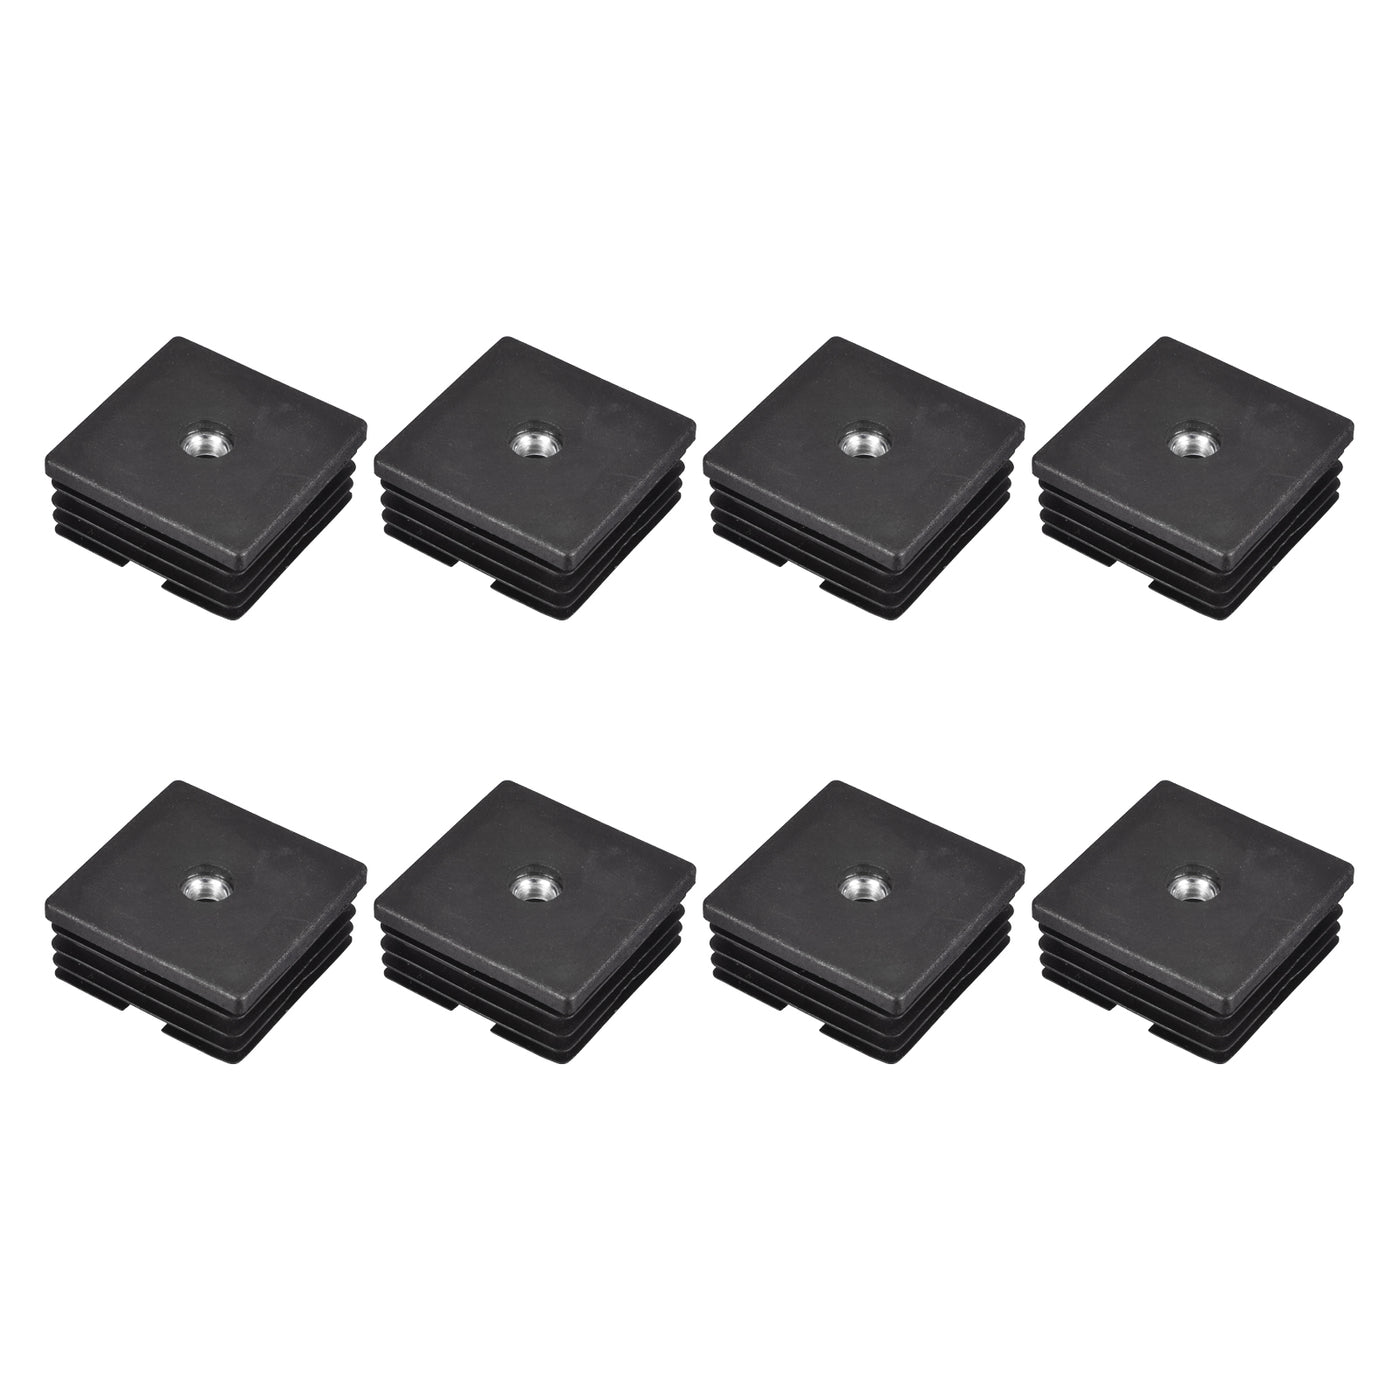 uxcell Uxcell 8Pcs 1.97"x1.97" Caster Insert with Thread, Square M8 Thread for Furniture